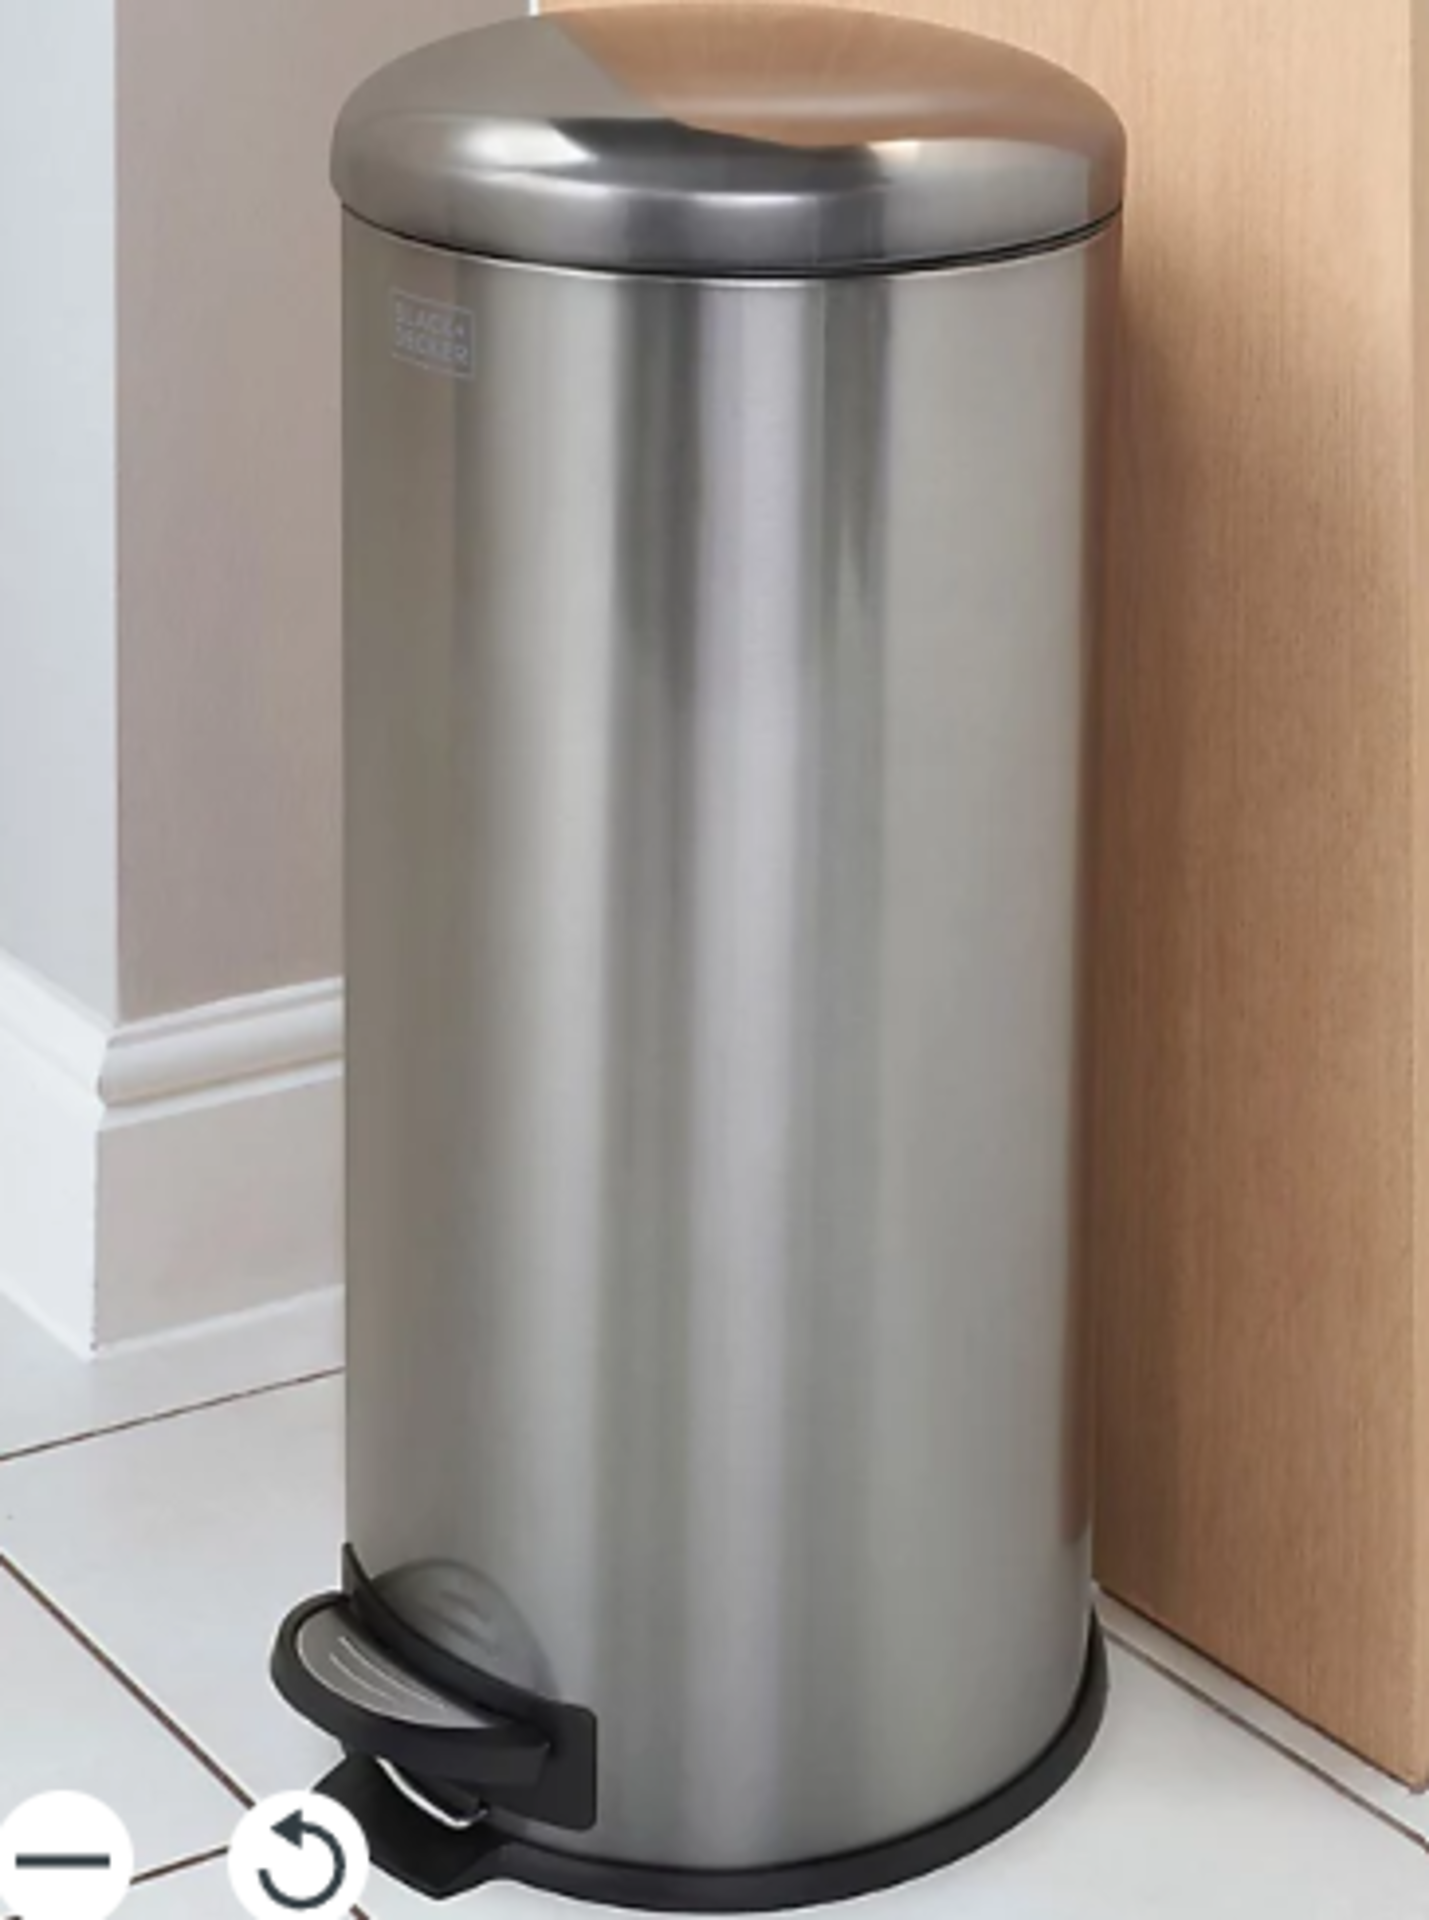 BLACK+DECKER 61119 30L Dark Stainless Steel Dome Shaped Pedal Bin With Soft Close Lid - R9.2.